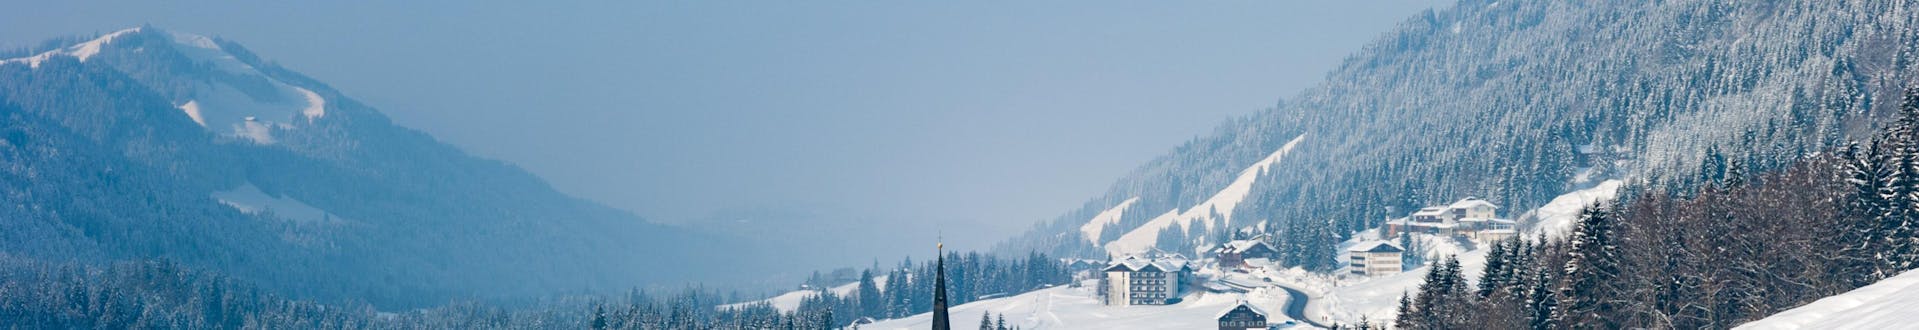 An image of the dreamy little Bavarian village of Baldersachwang in winter, a popular ski resort in which visitors can book ski lessons with one of the local ski schools.